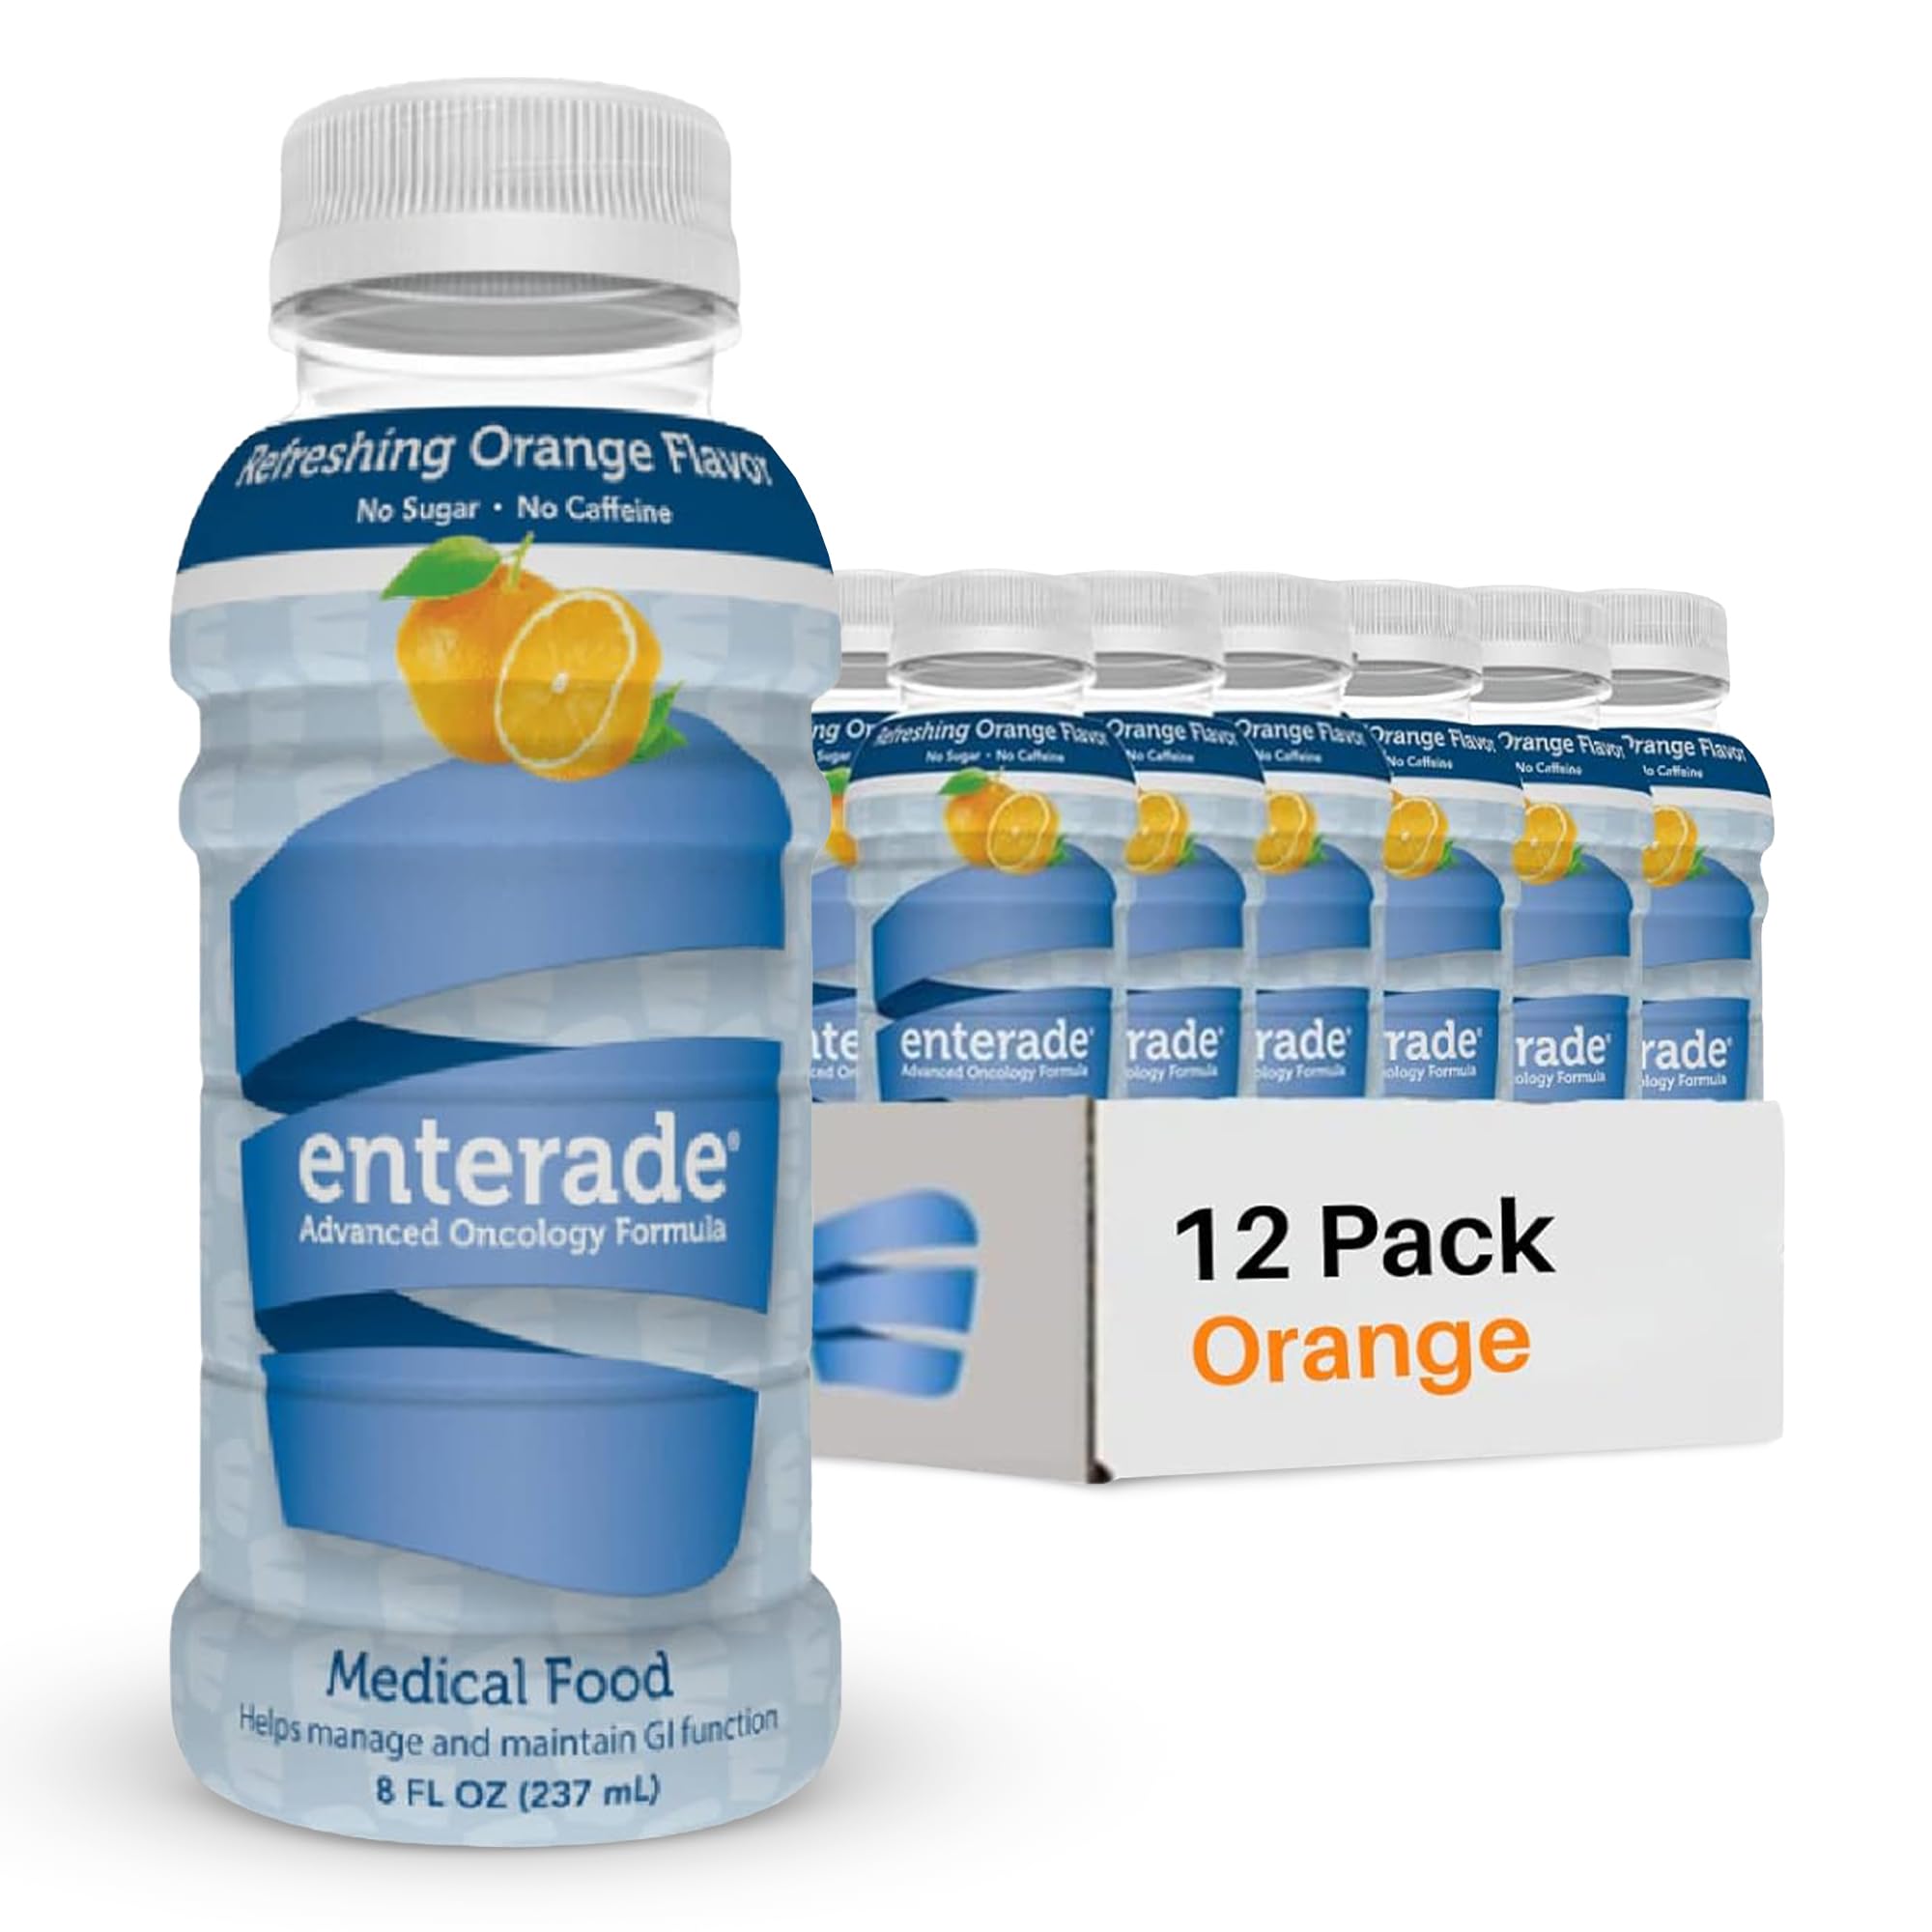 enterade AO Orange, 12 Pack, Specially Formulated to Reduce Treatment GI Side Effects, Supportive Care Beverage, 8oz Bottles (12 Pack)